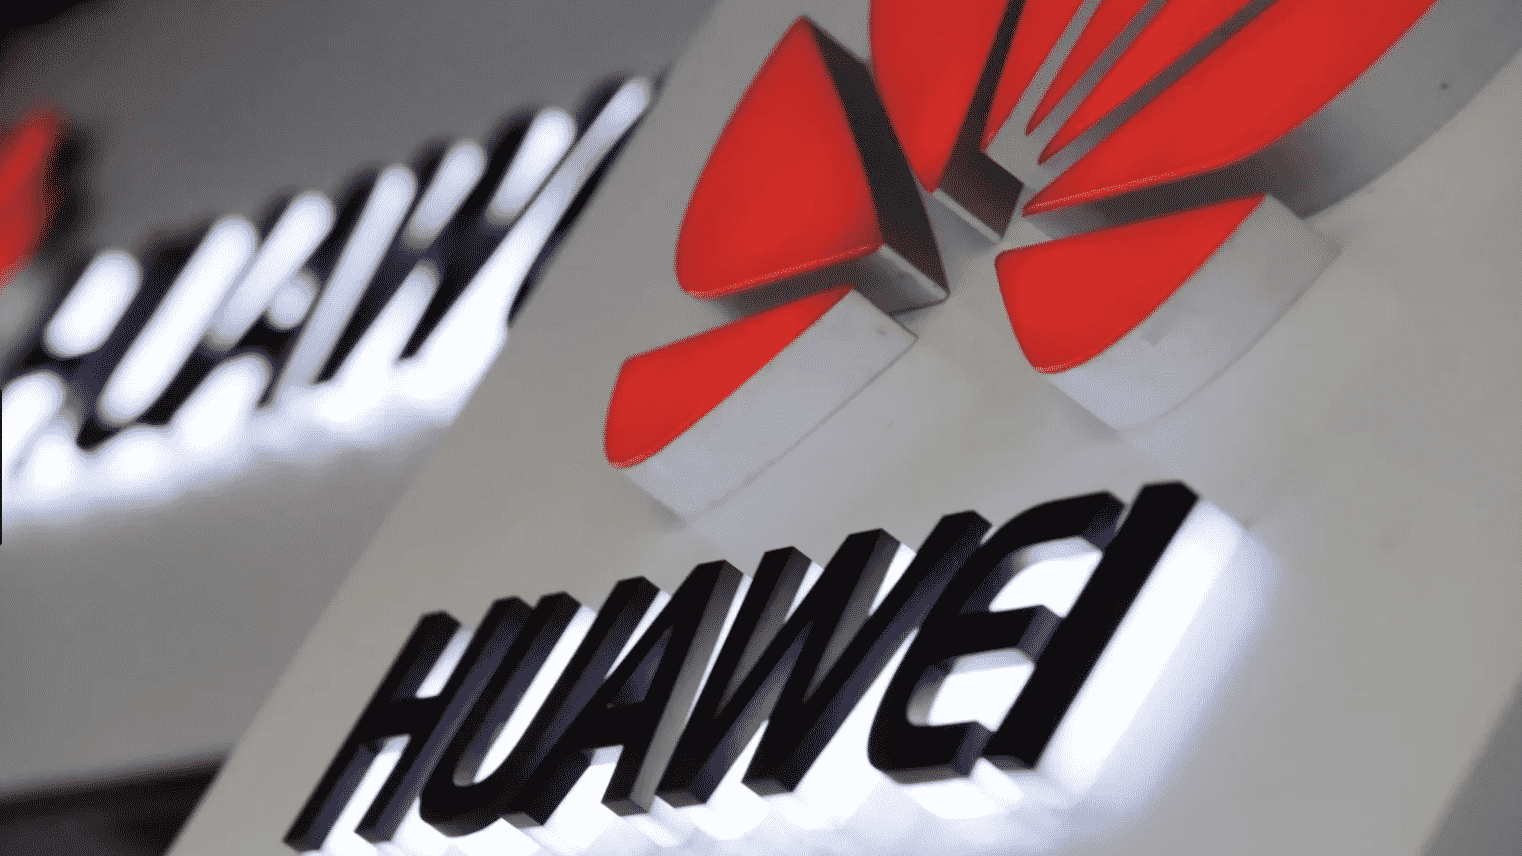 Google Cuts Off Huawei’s Android License; Huawei Faces US Trade Sanctions as a National Security Threat